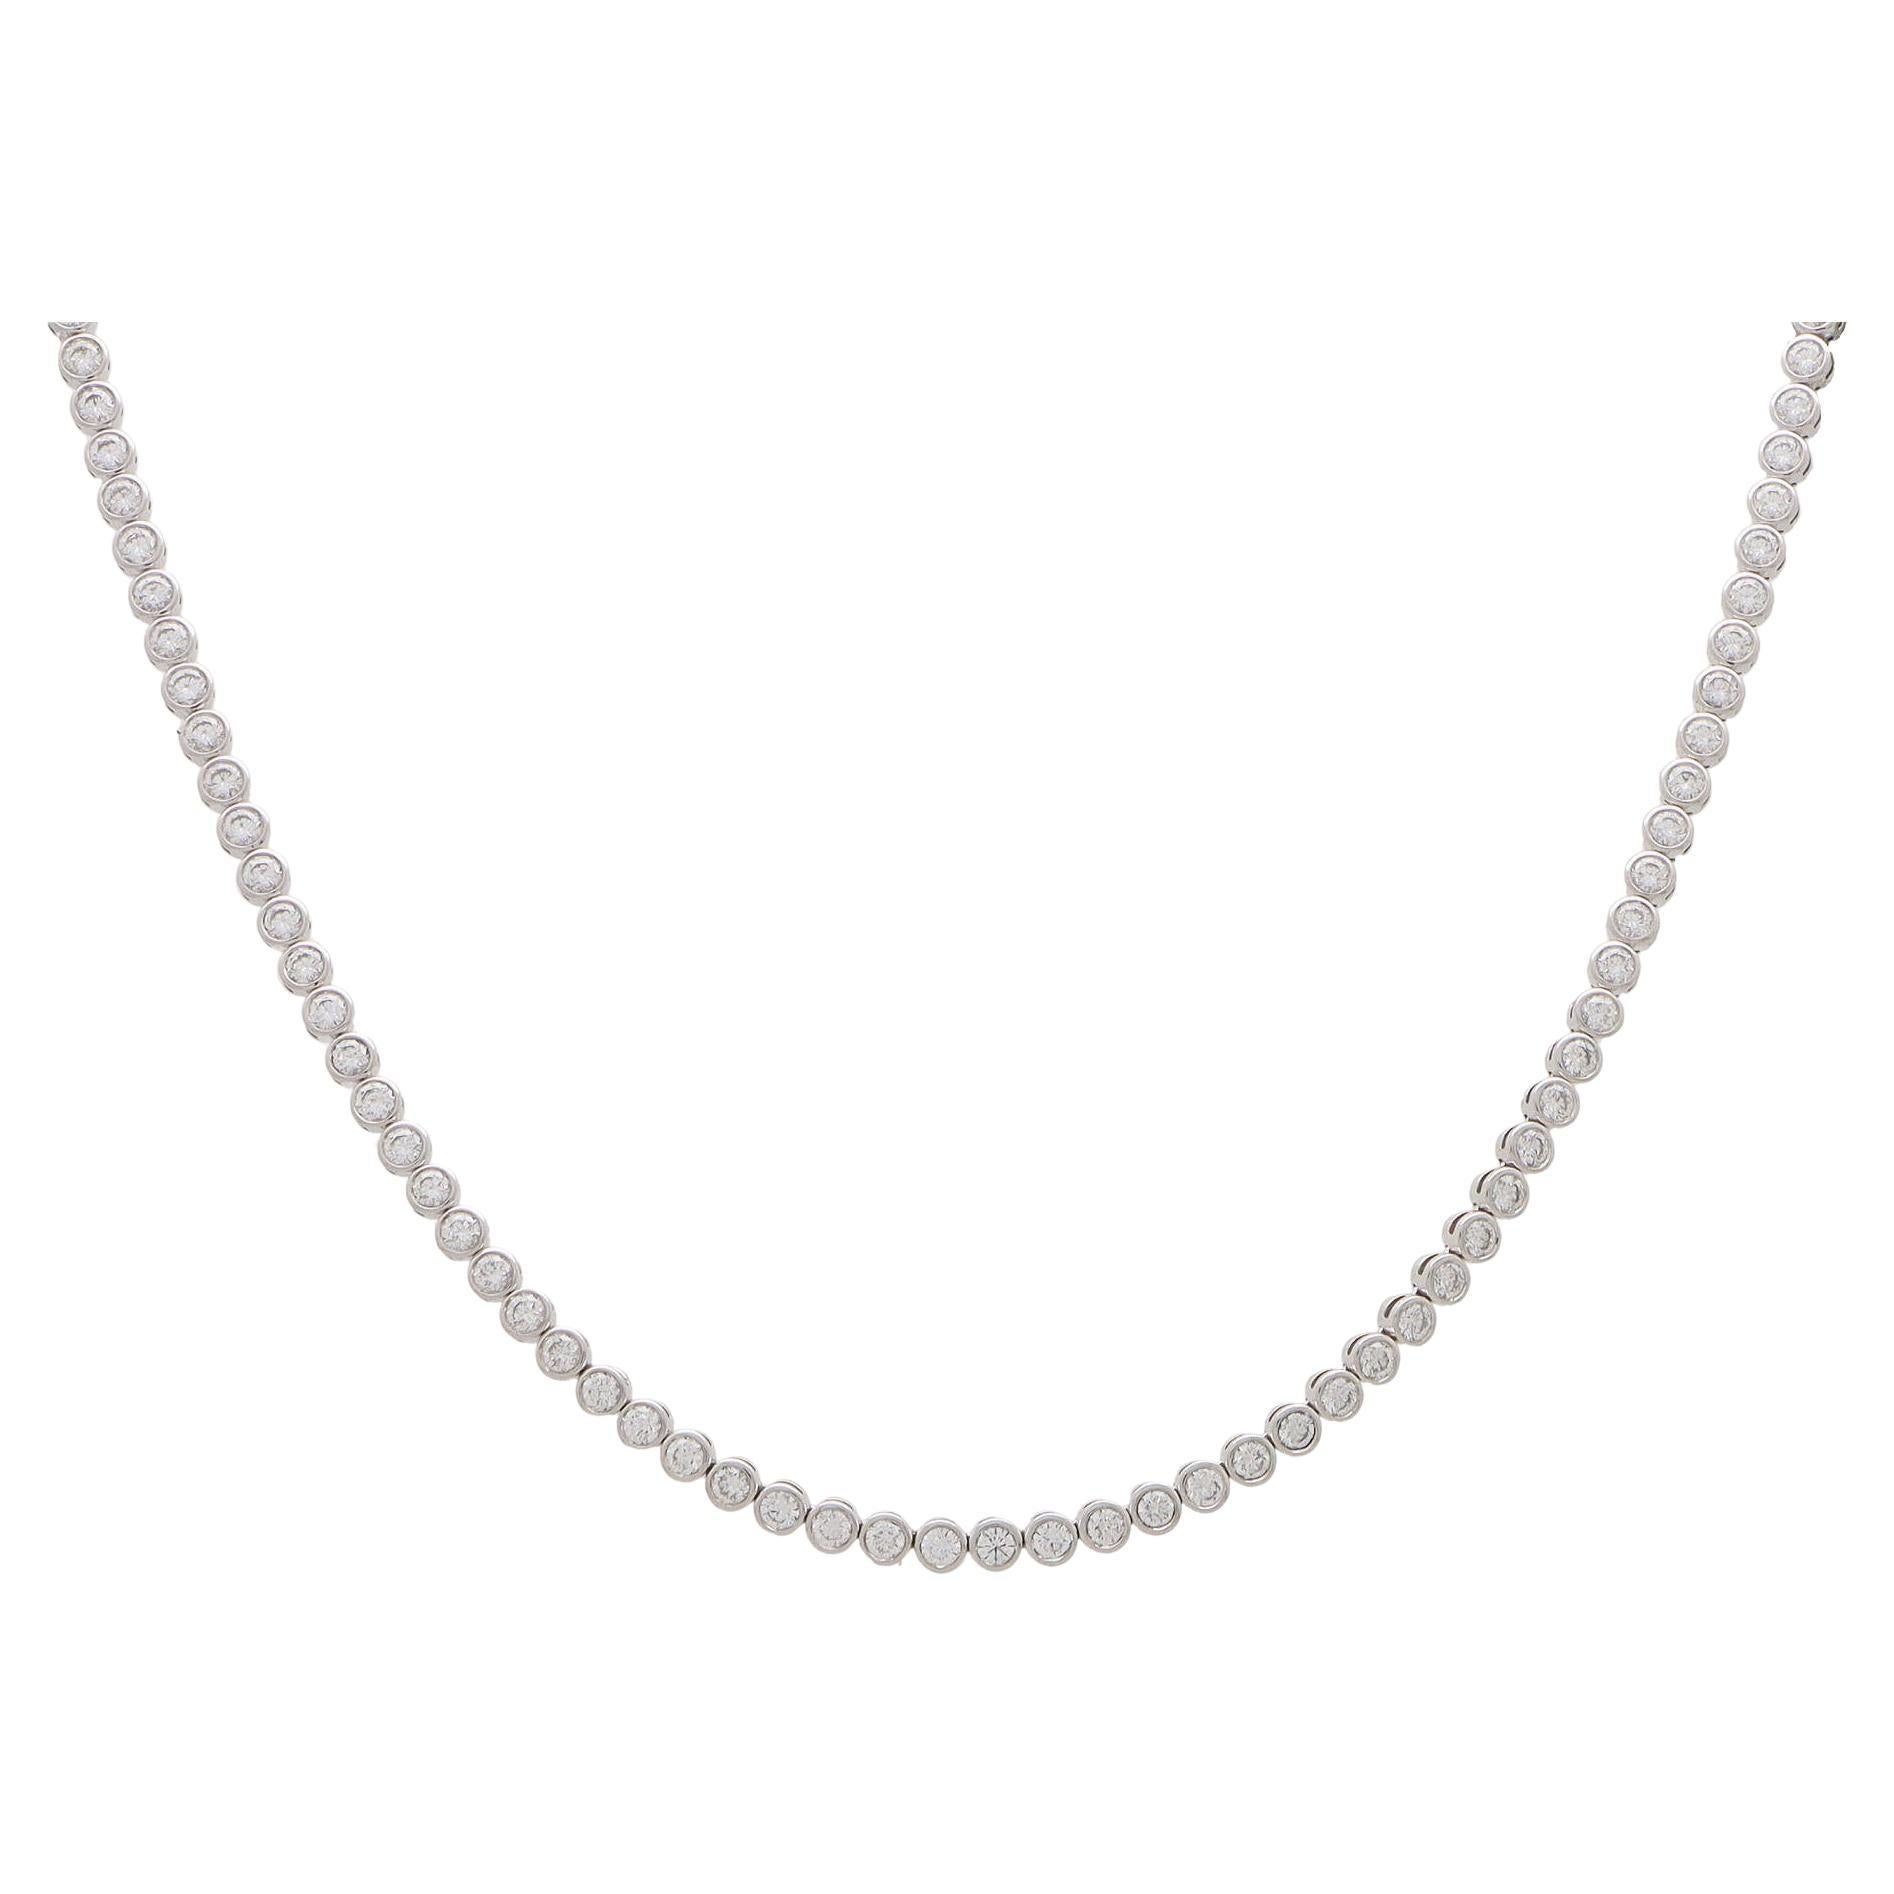 Vintage De Beers Diamond Line Riviere Necklace in 18k White Gold